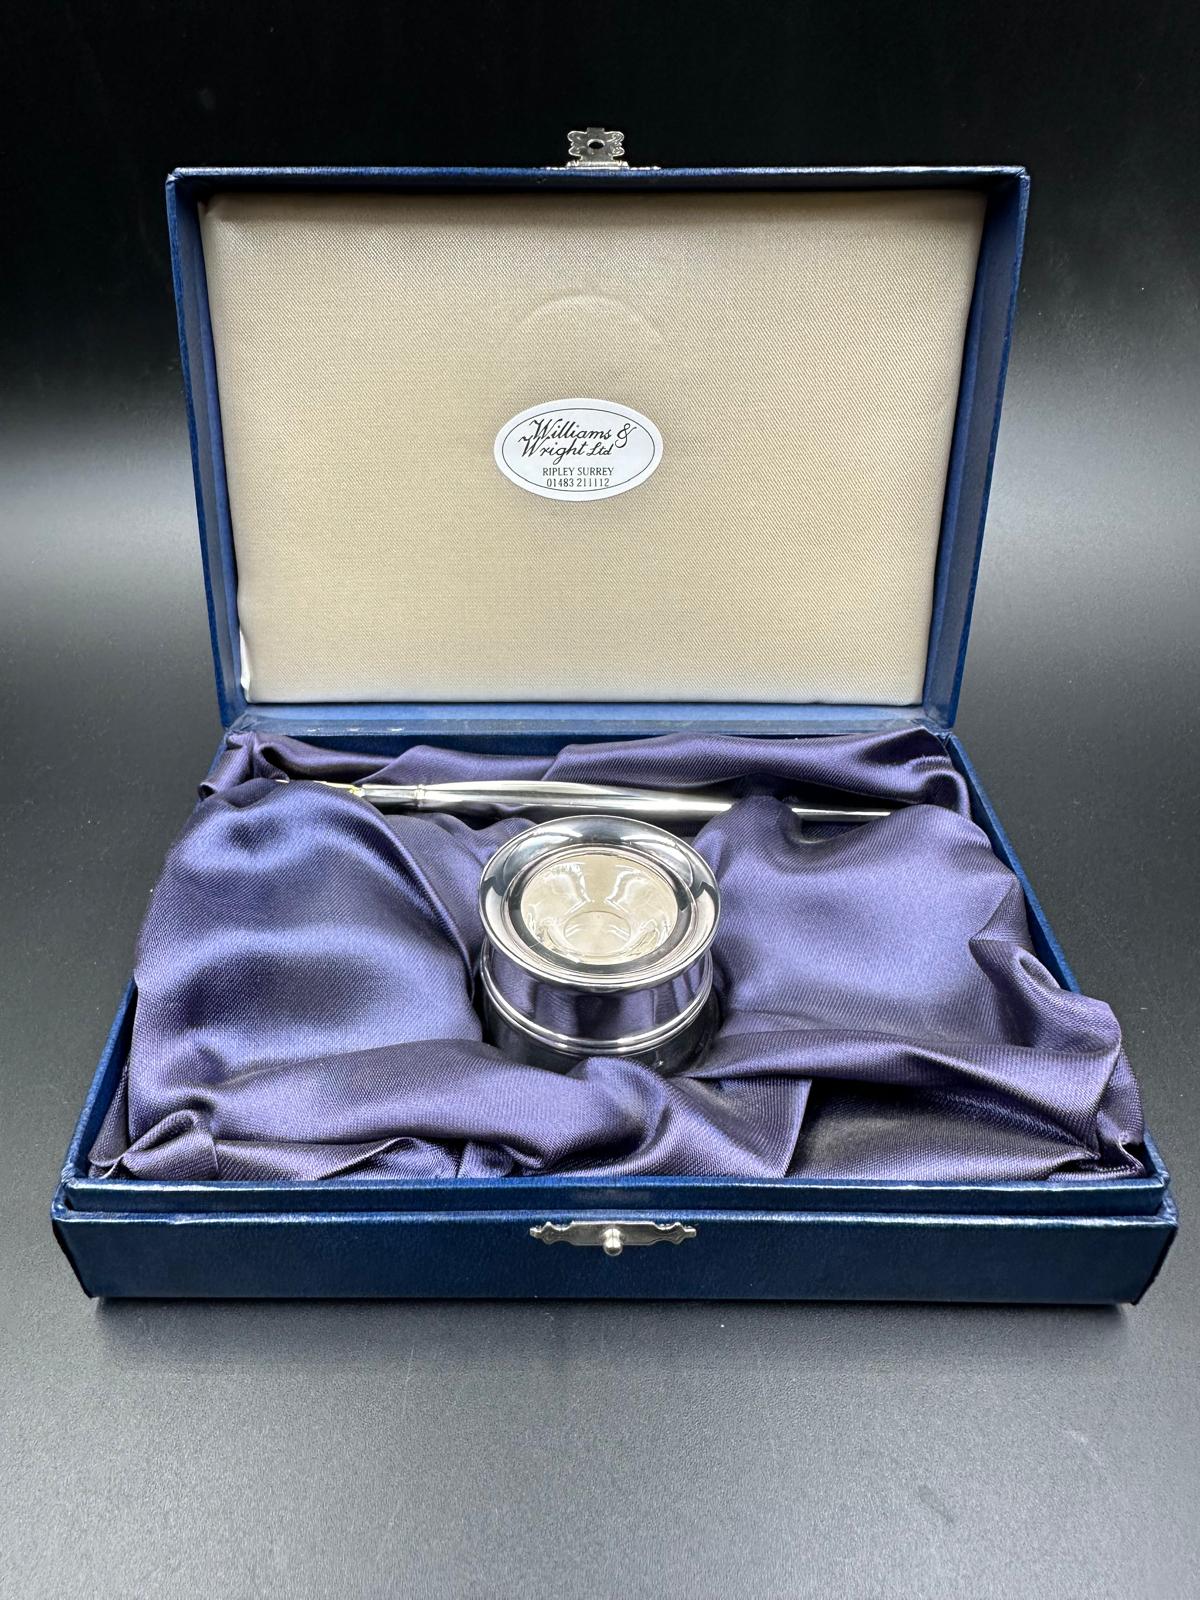 A Carr's of Sheffield Ltd silver writing set to include inkwell and pen, hallmarked for Sheffield